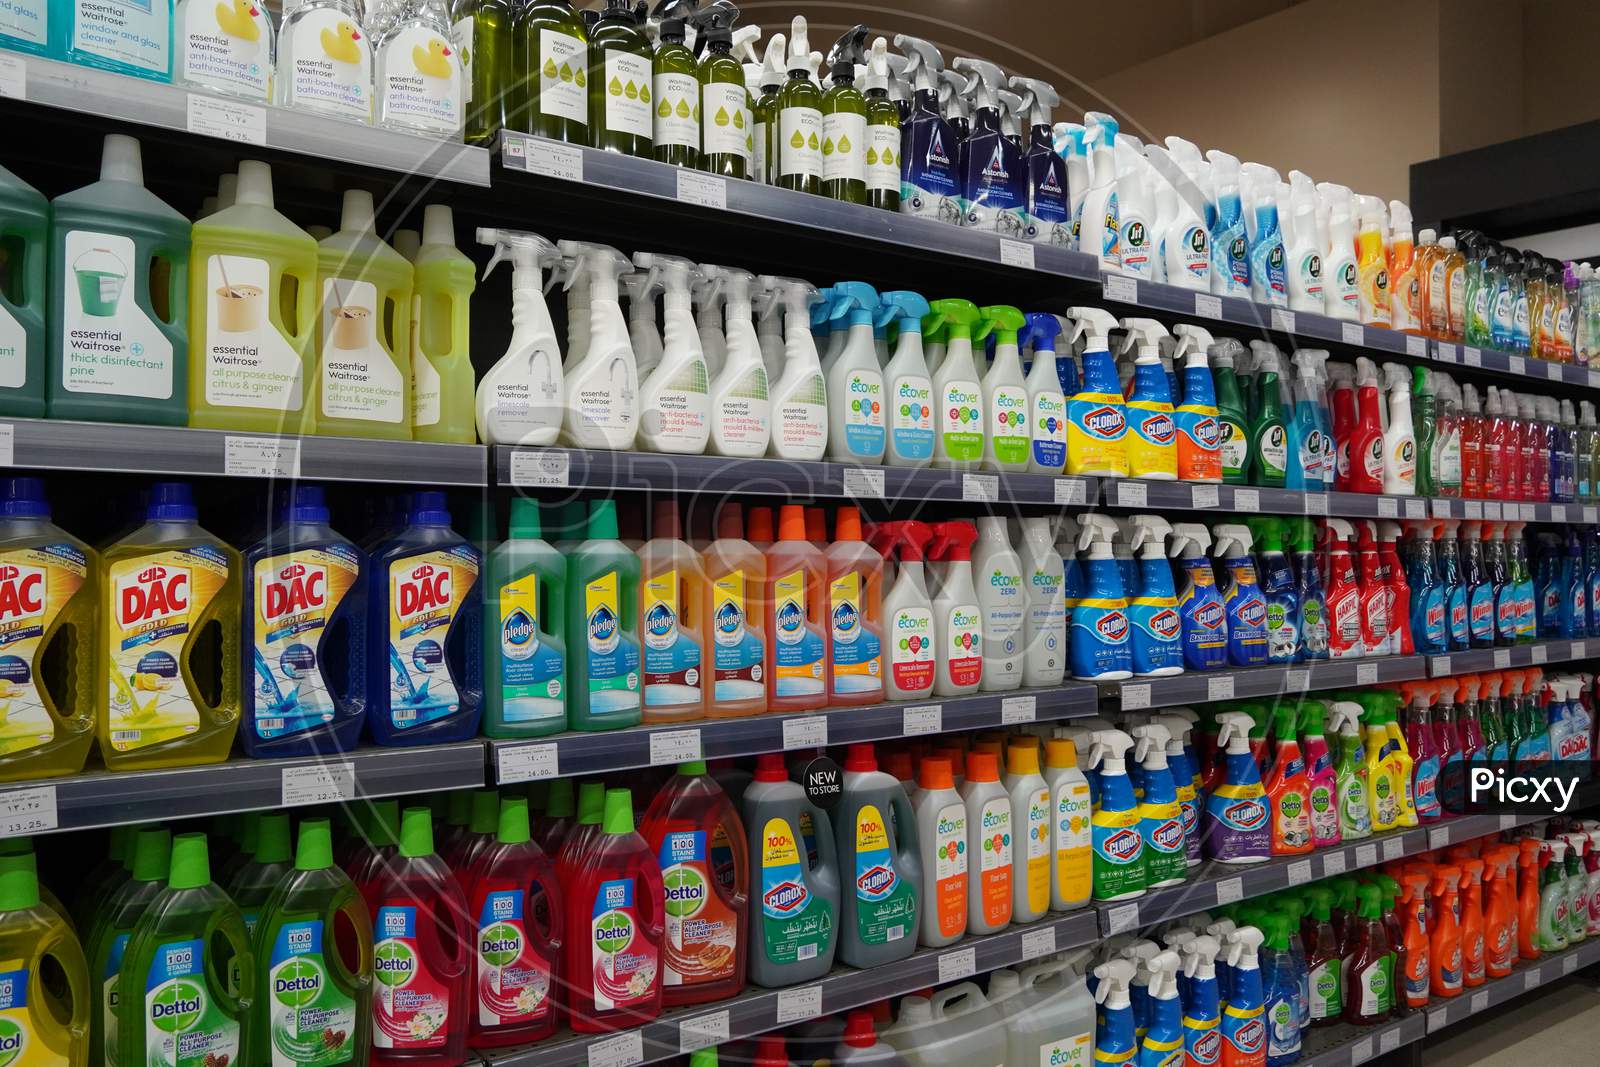 Cleaning Supplies, Sprays, Liquids Cleaning Detergents For Sale On Supermarket Stand. Bottles With Cleaning Products For Cleaning House Of Various Manufacturers On Shelves. India